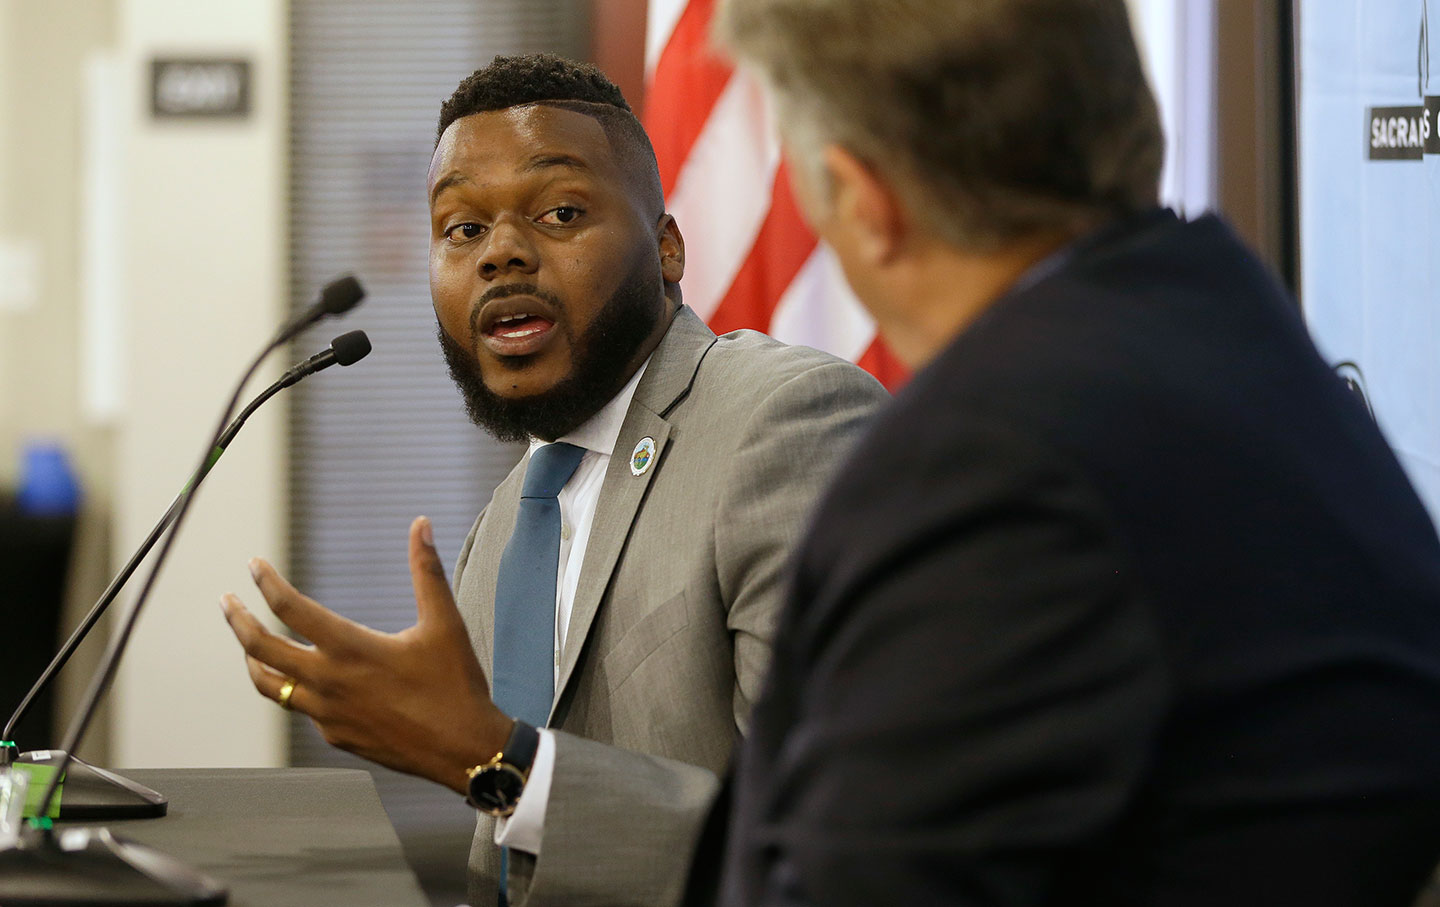 Stockton Mayor Michael Tubbs responds to a question during his appearance before the Sacramento Press Club, Tuesday, July 10, 2018, in Sacramento, California. (Rich Pedroncelli / AP Photo)